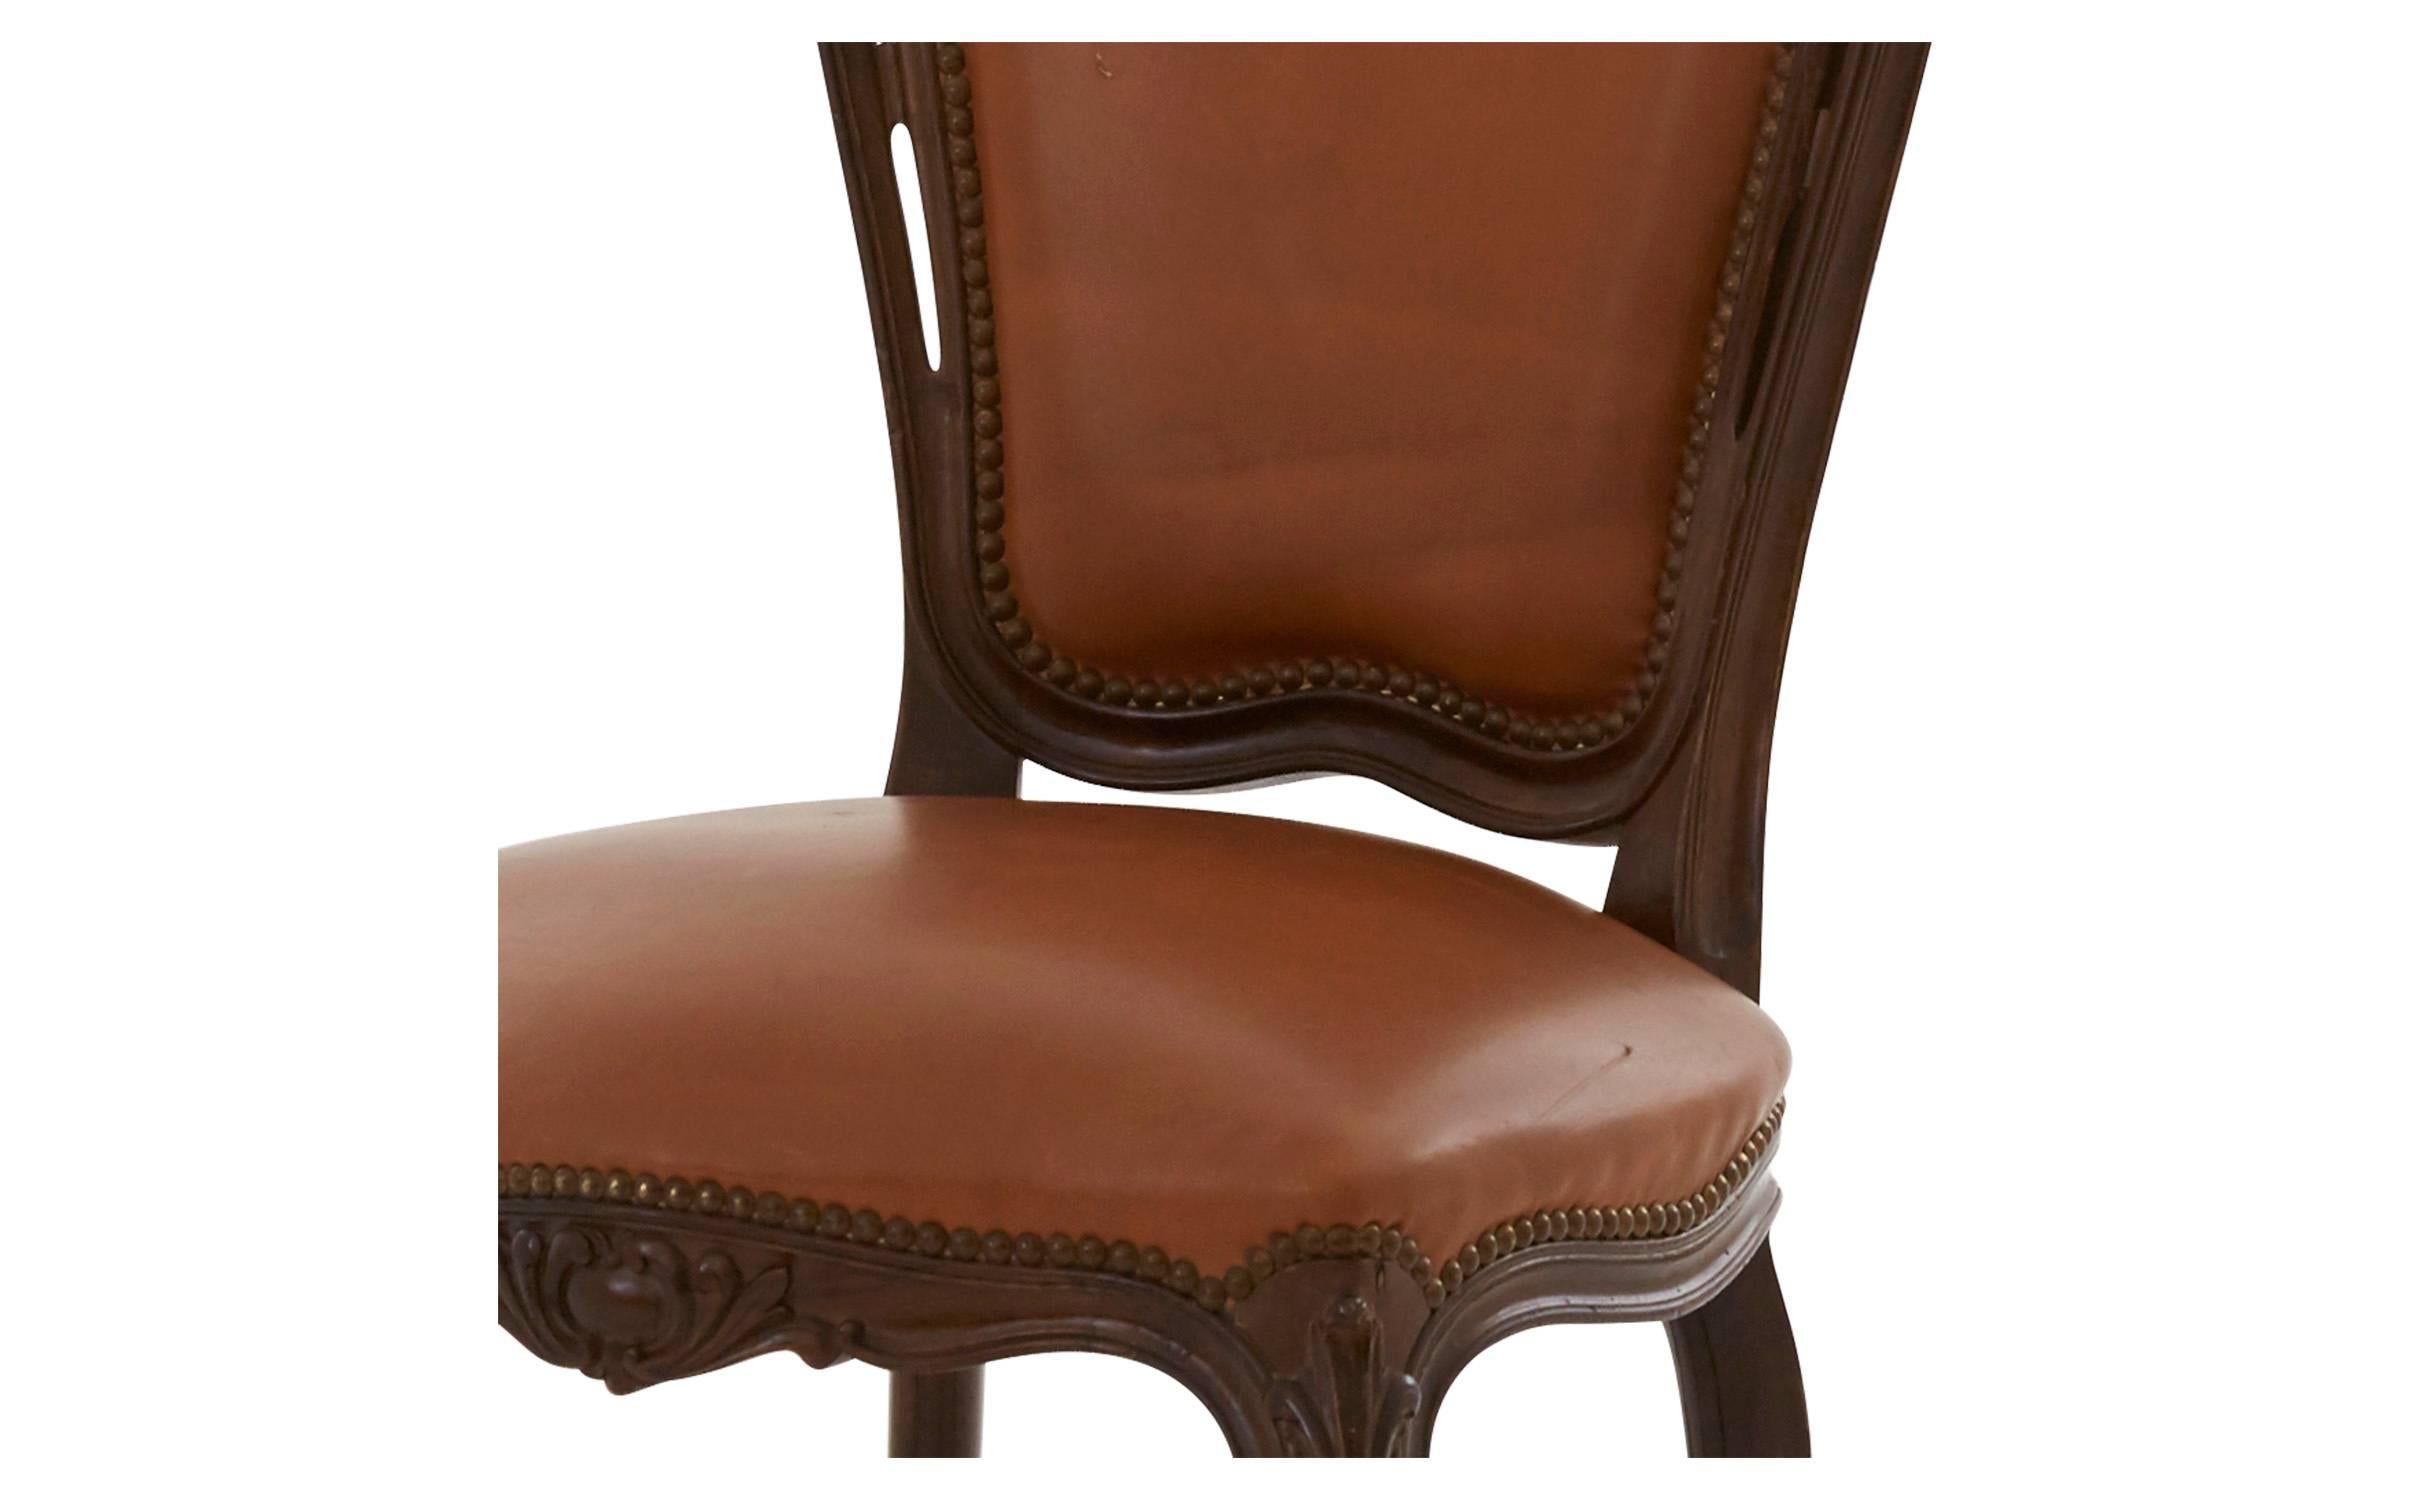 • Original caramel leather upholstery
• Ornate wood frame with antique nailhead trim, 
• 20th century, 
• Spain

Dimensions:
•overall: 17' D x 20.5' W x 40.5' H 
•seat height: 18' H.